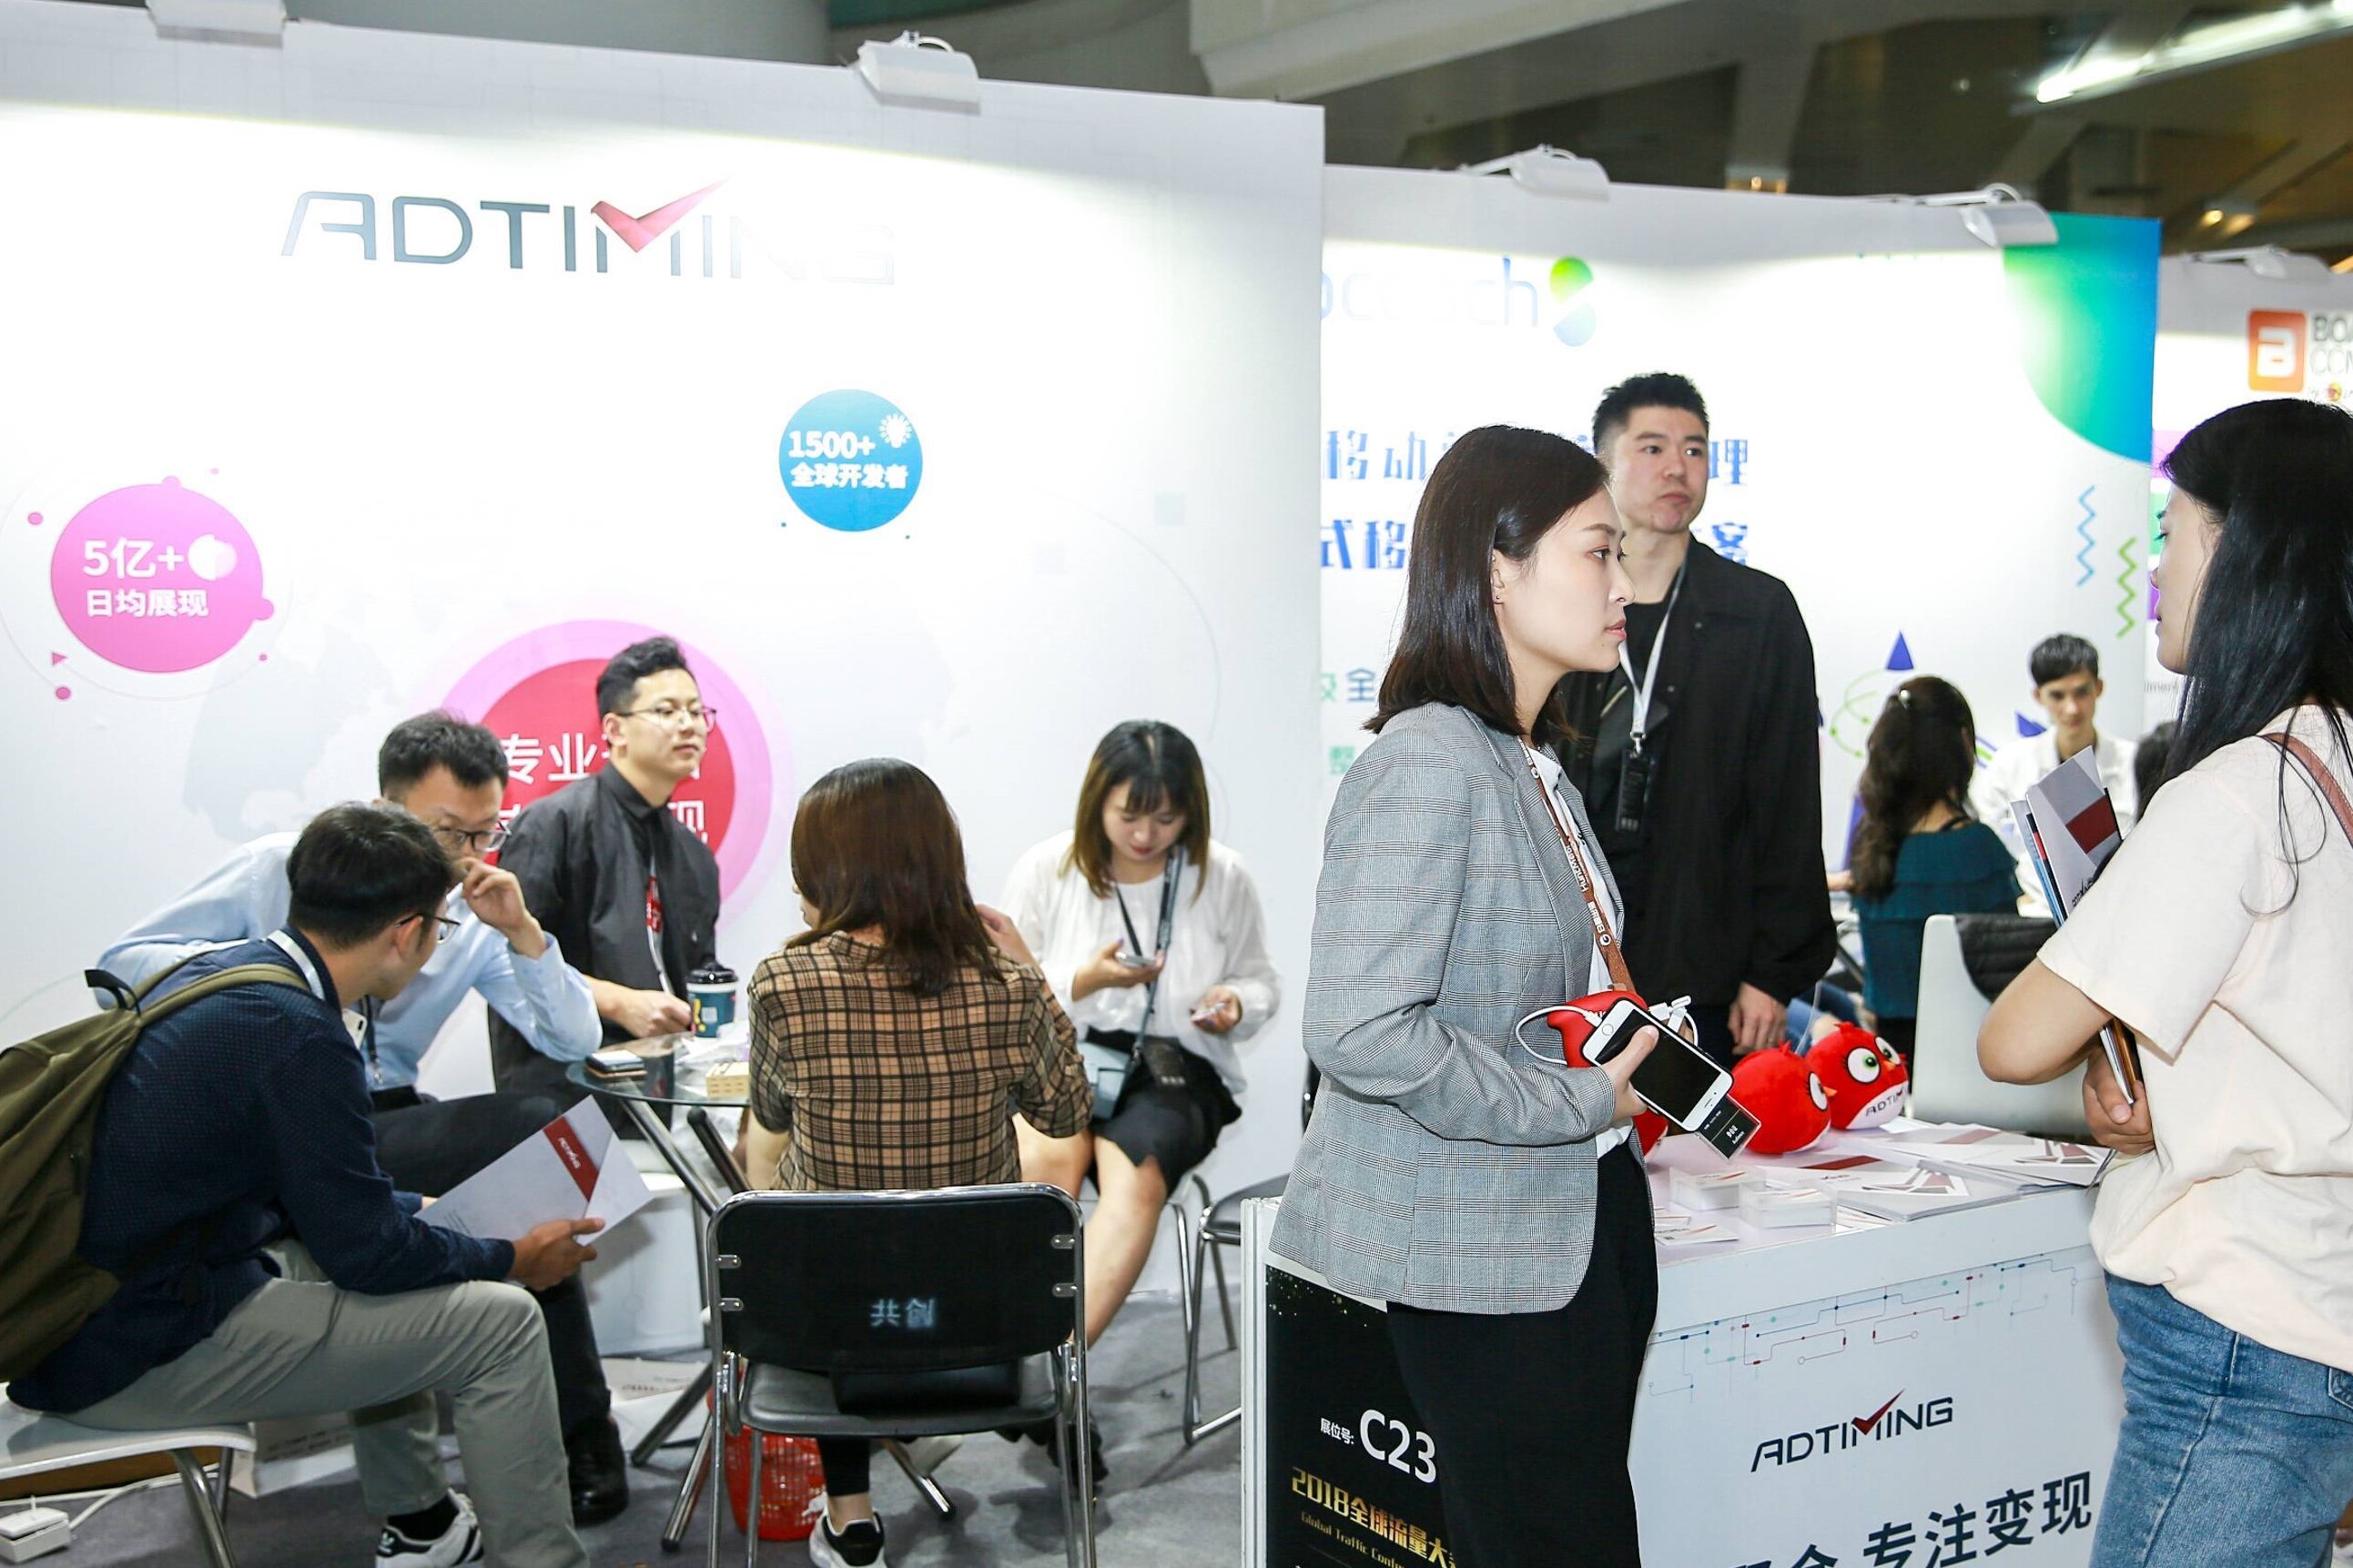 Visitors at the AdTiming Global Traffic Conference Booth